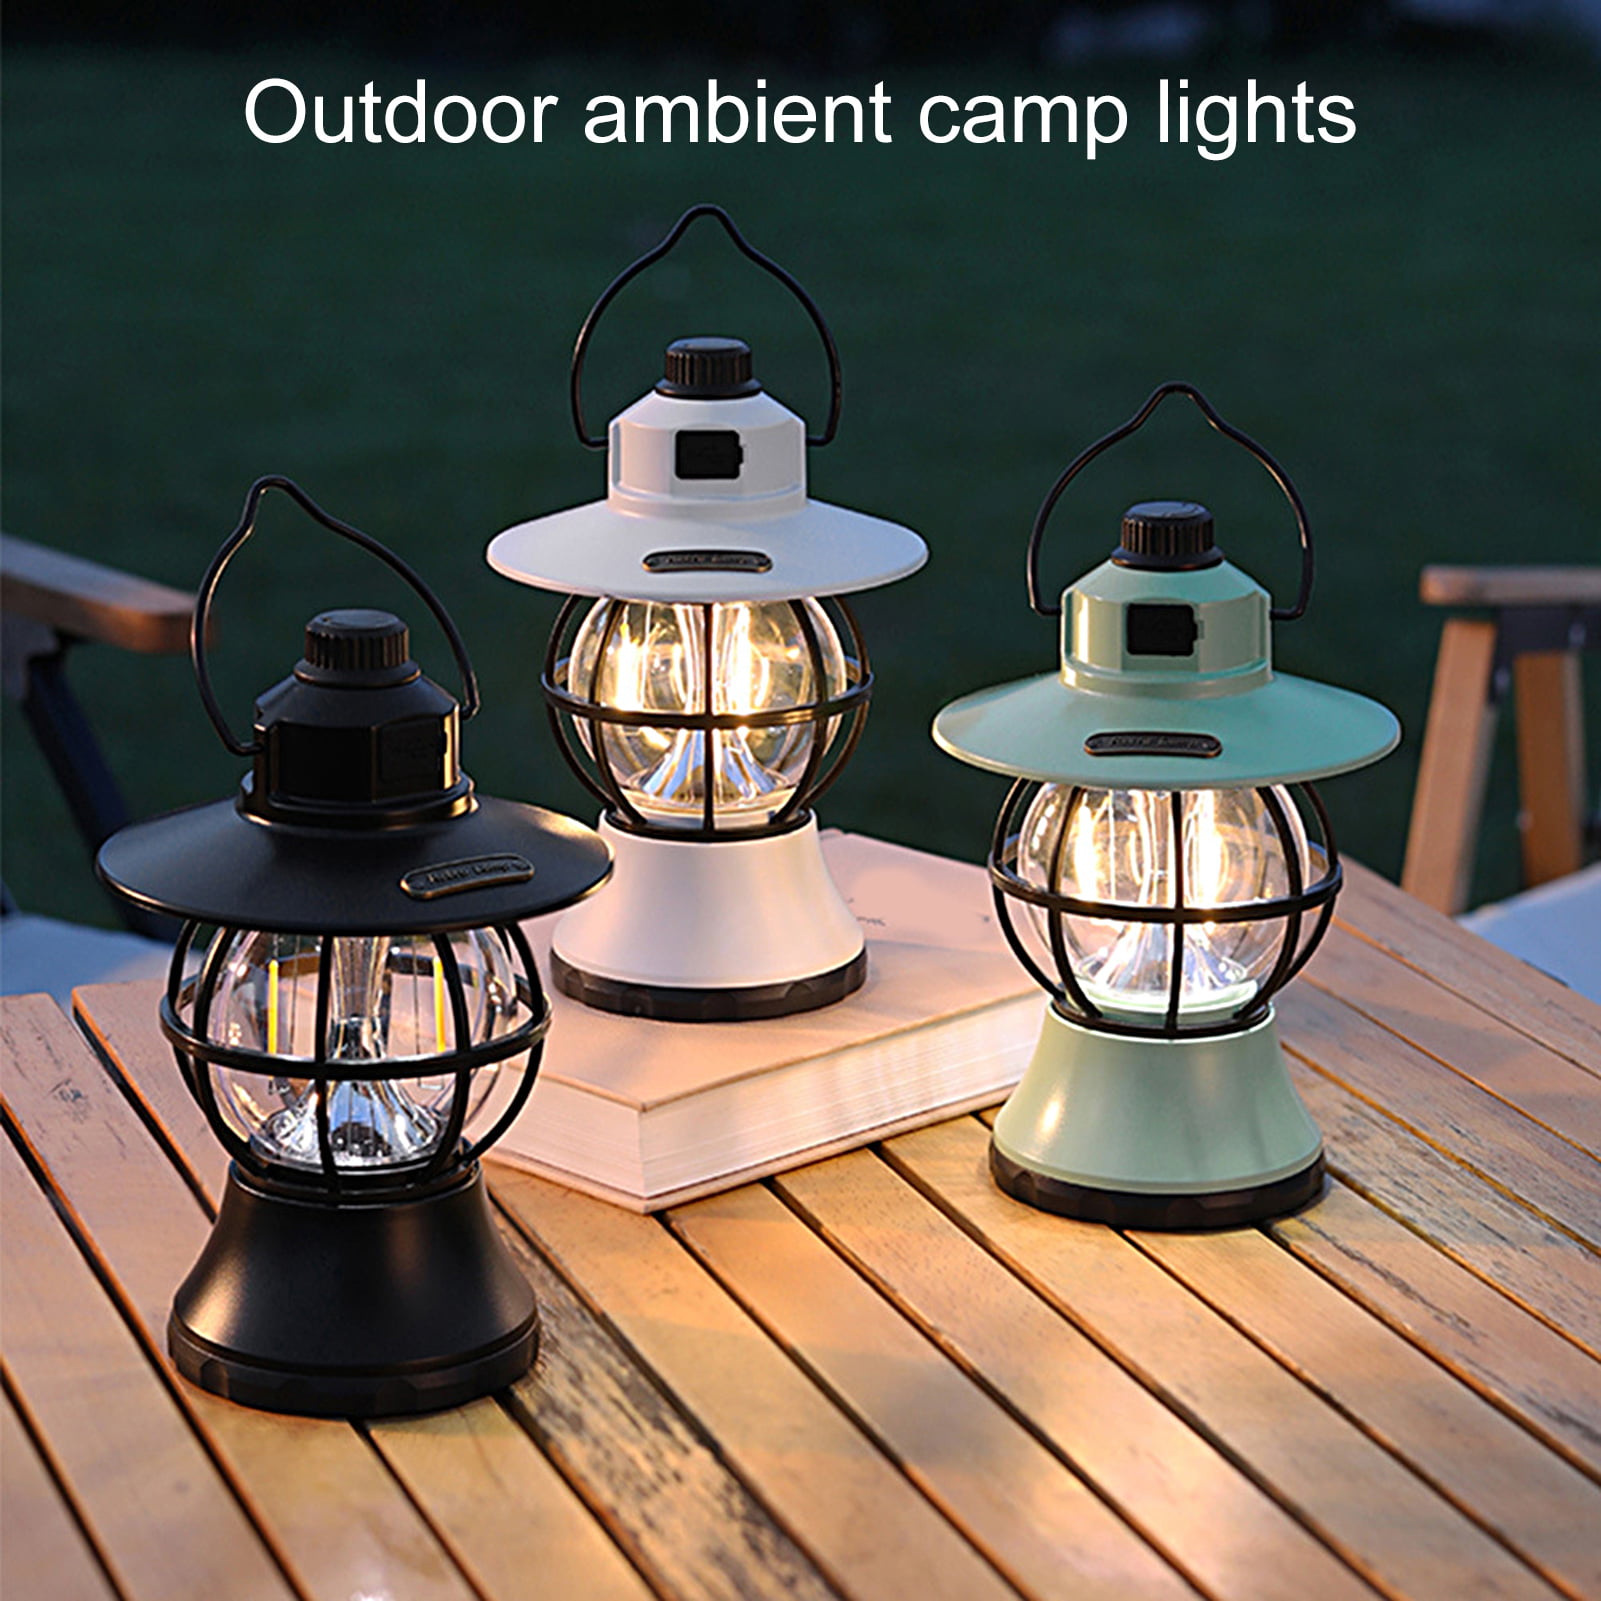 X19 camping light, rechargeable retro metal camping light, battery operated  hanging candle light, portable waterproof outdoor tent light bulb, suitable  for power outages, emergency lighting, outdoor camping White - KENTFAITH